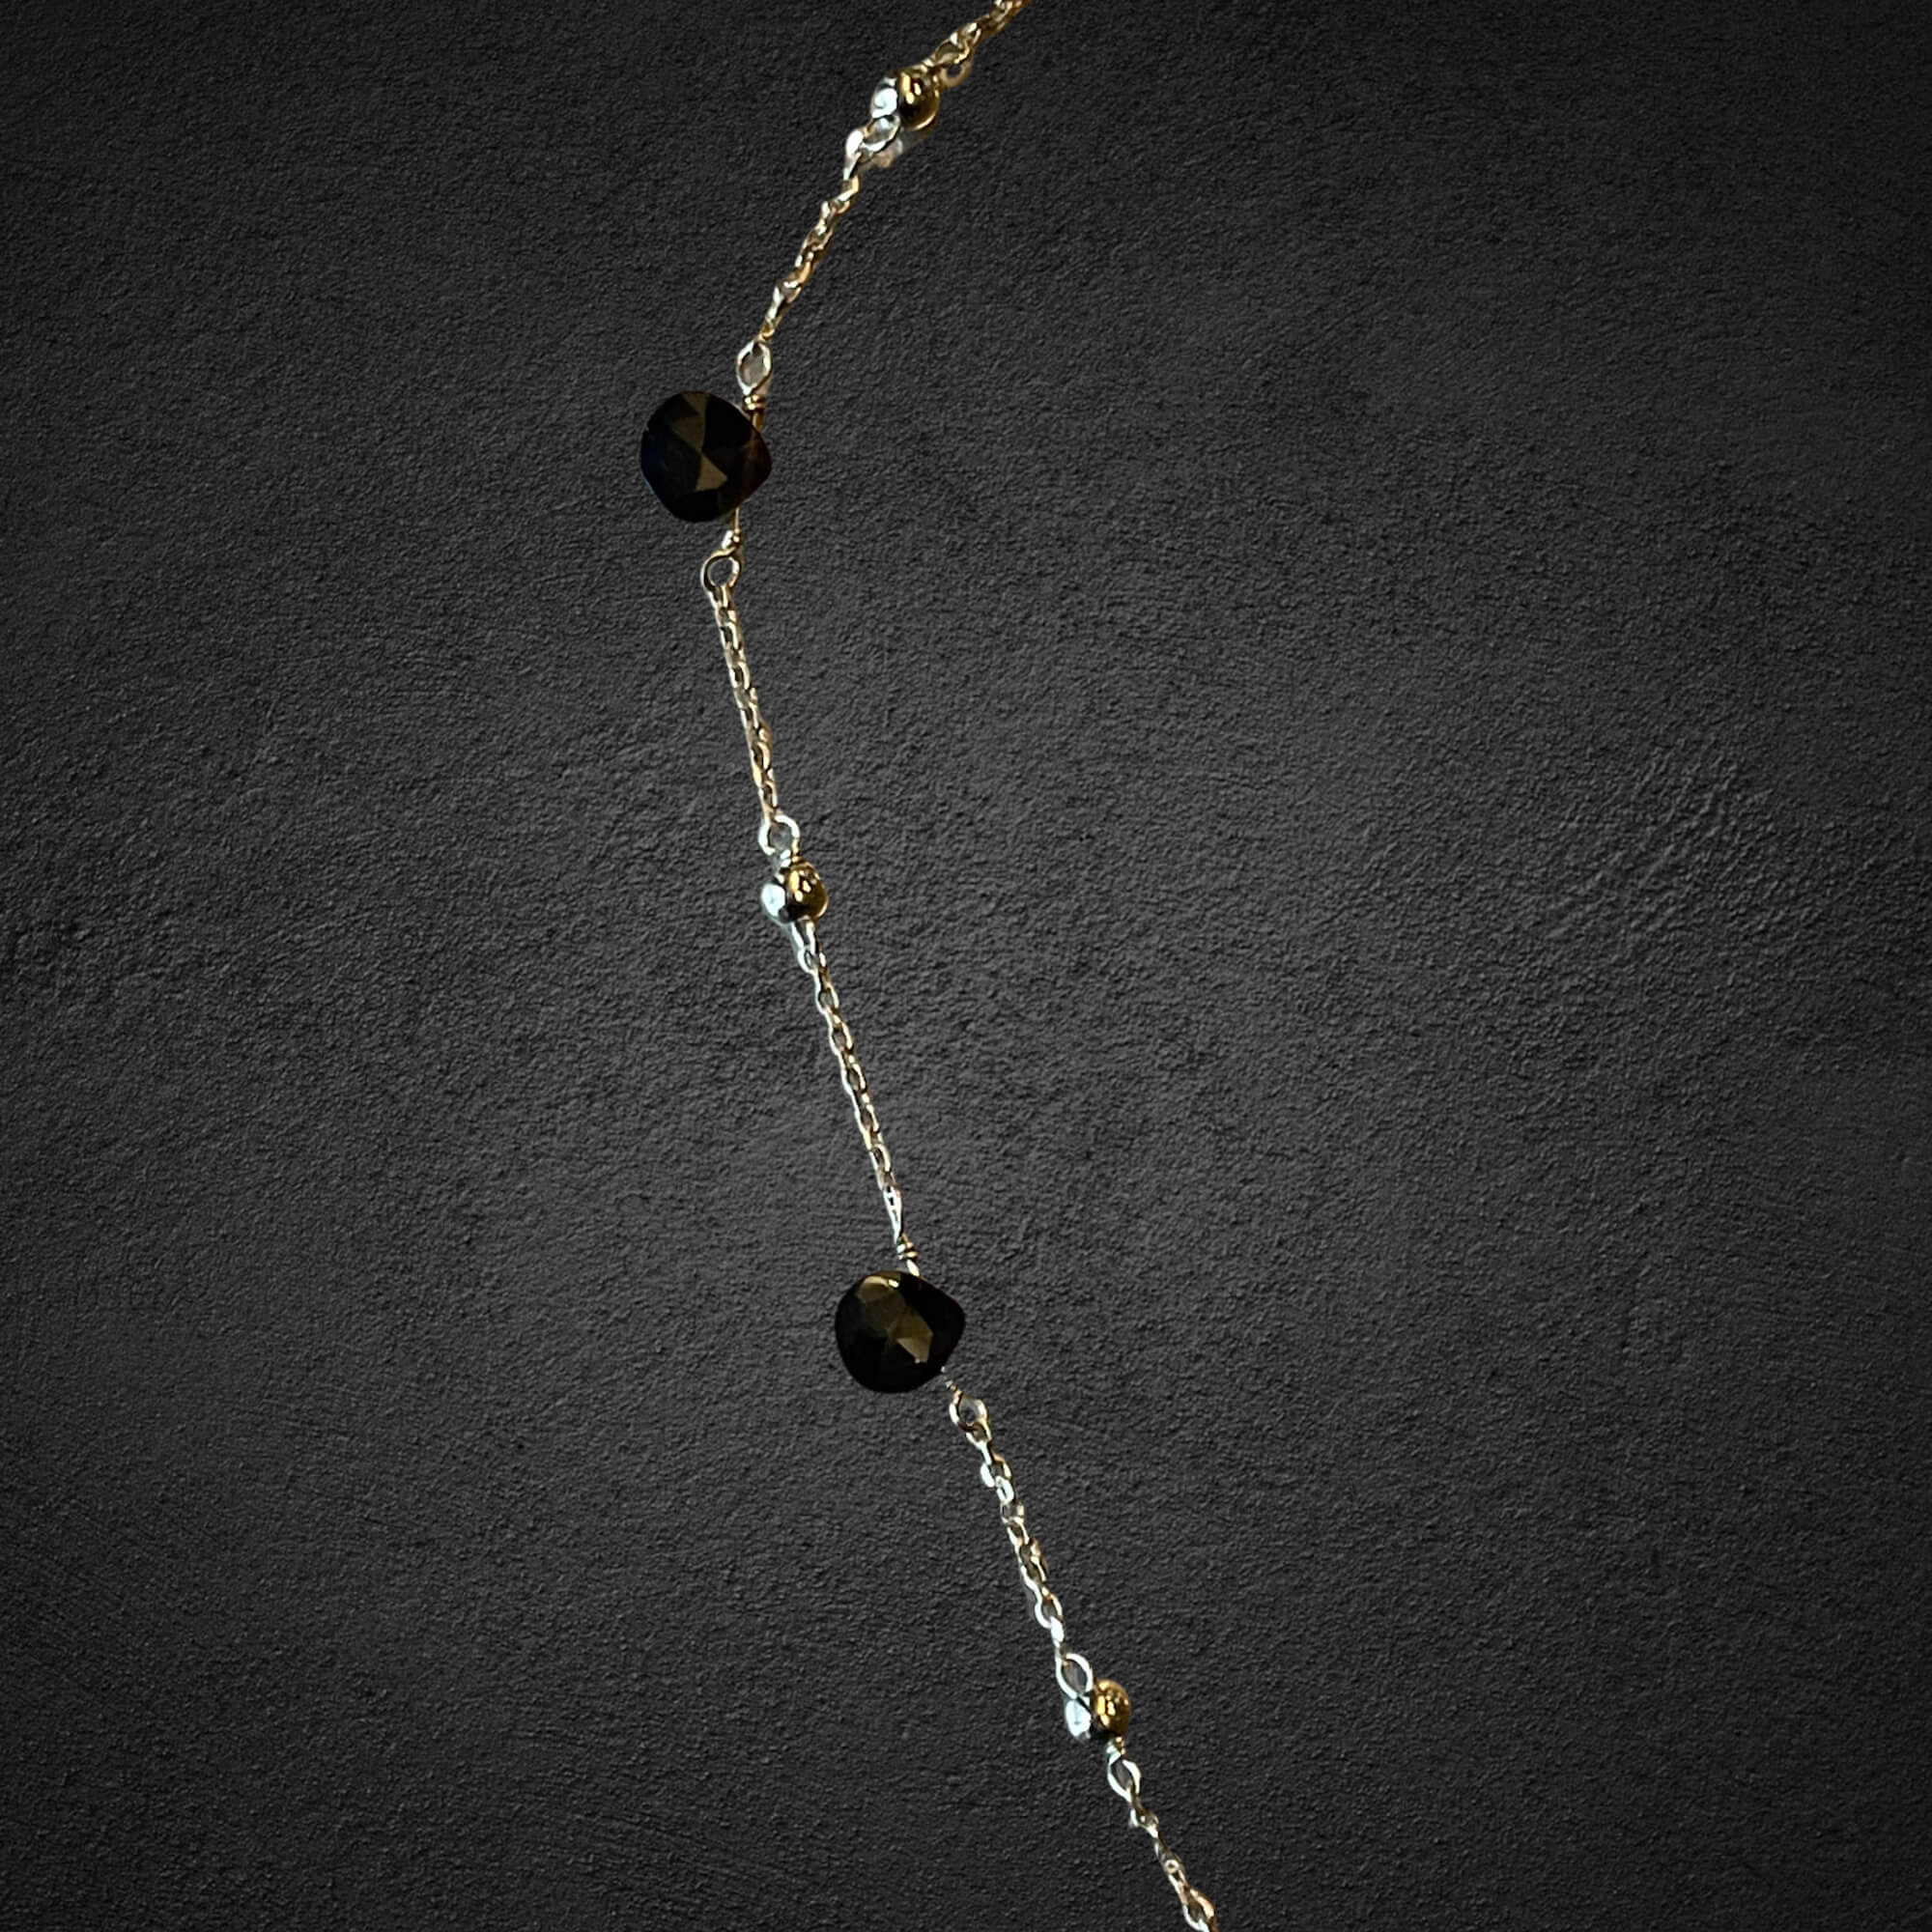 Gilded necklace with onyx stones